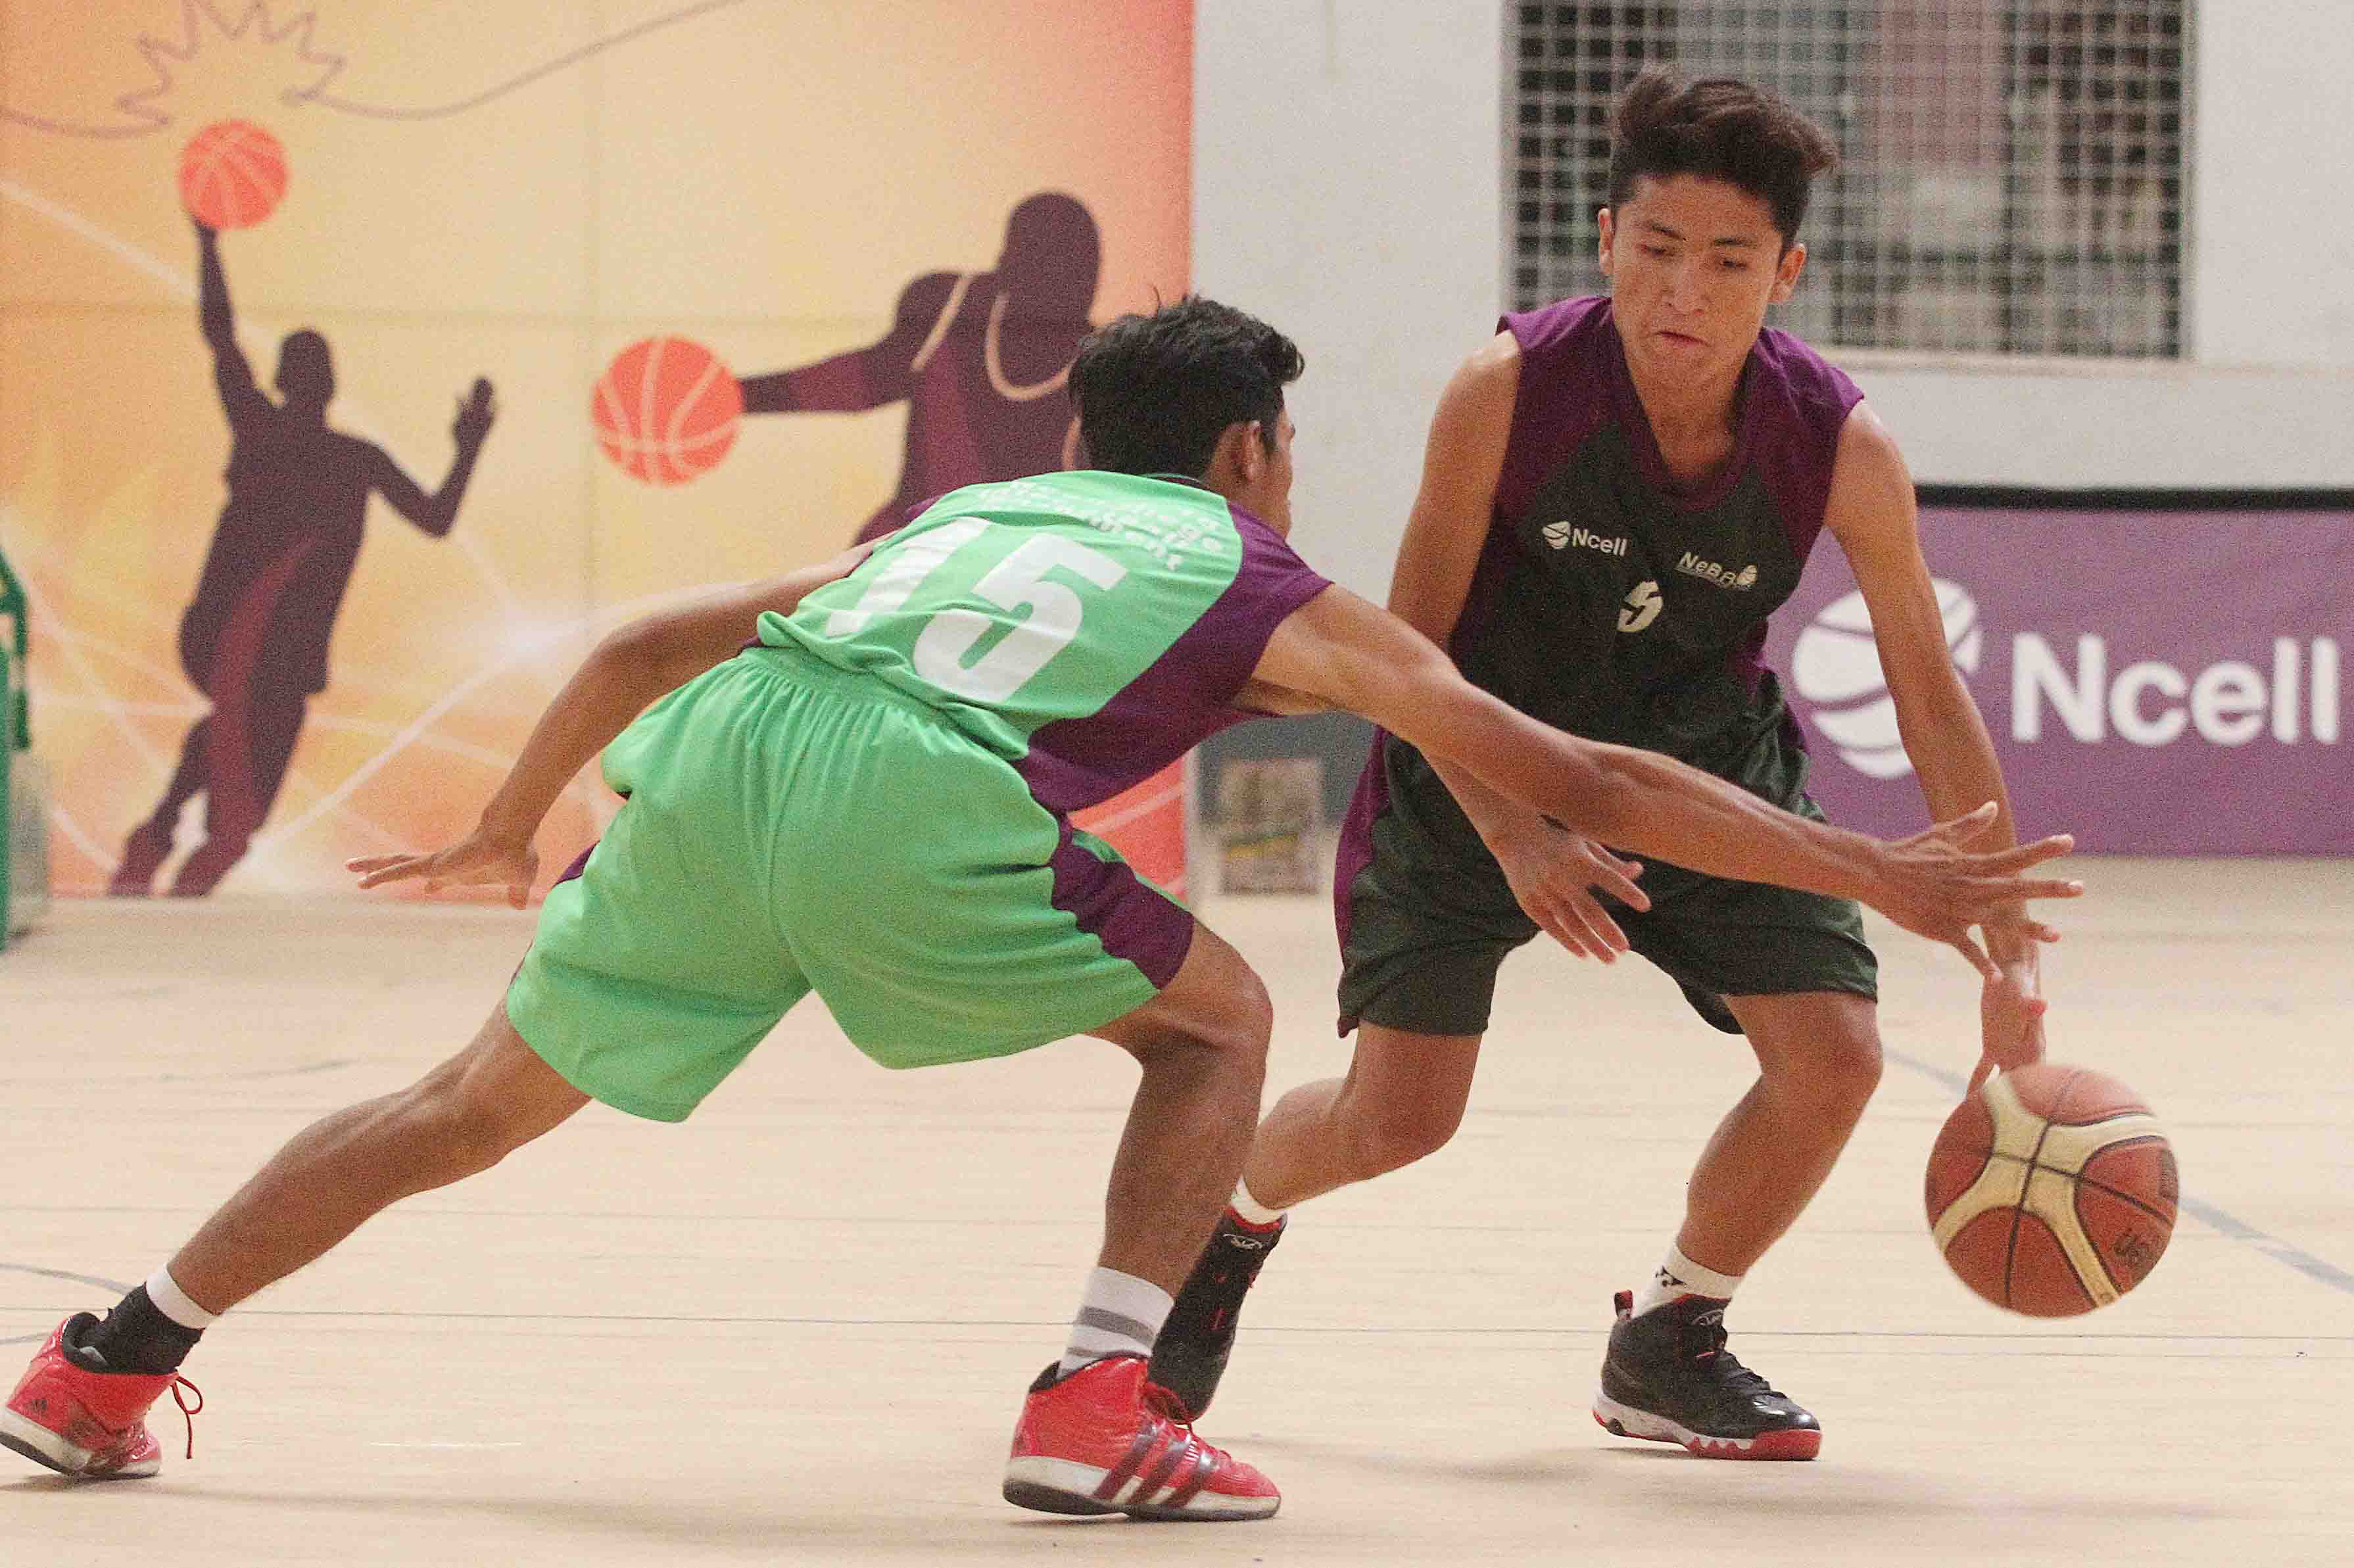 Tsewang G. Bista (right) of Xavier International College drives the ball against Suraj Lama of NASA International College during the Ncell U-18 Inter College Basketball Championship at Nepali Army Sports Complex in Lalitpur on Friday. (Credit Image: Udipt Singh Chhetry)